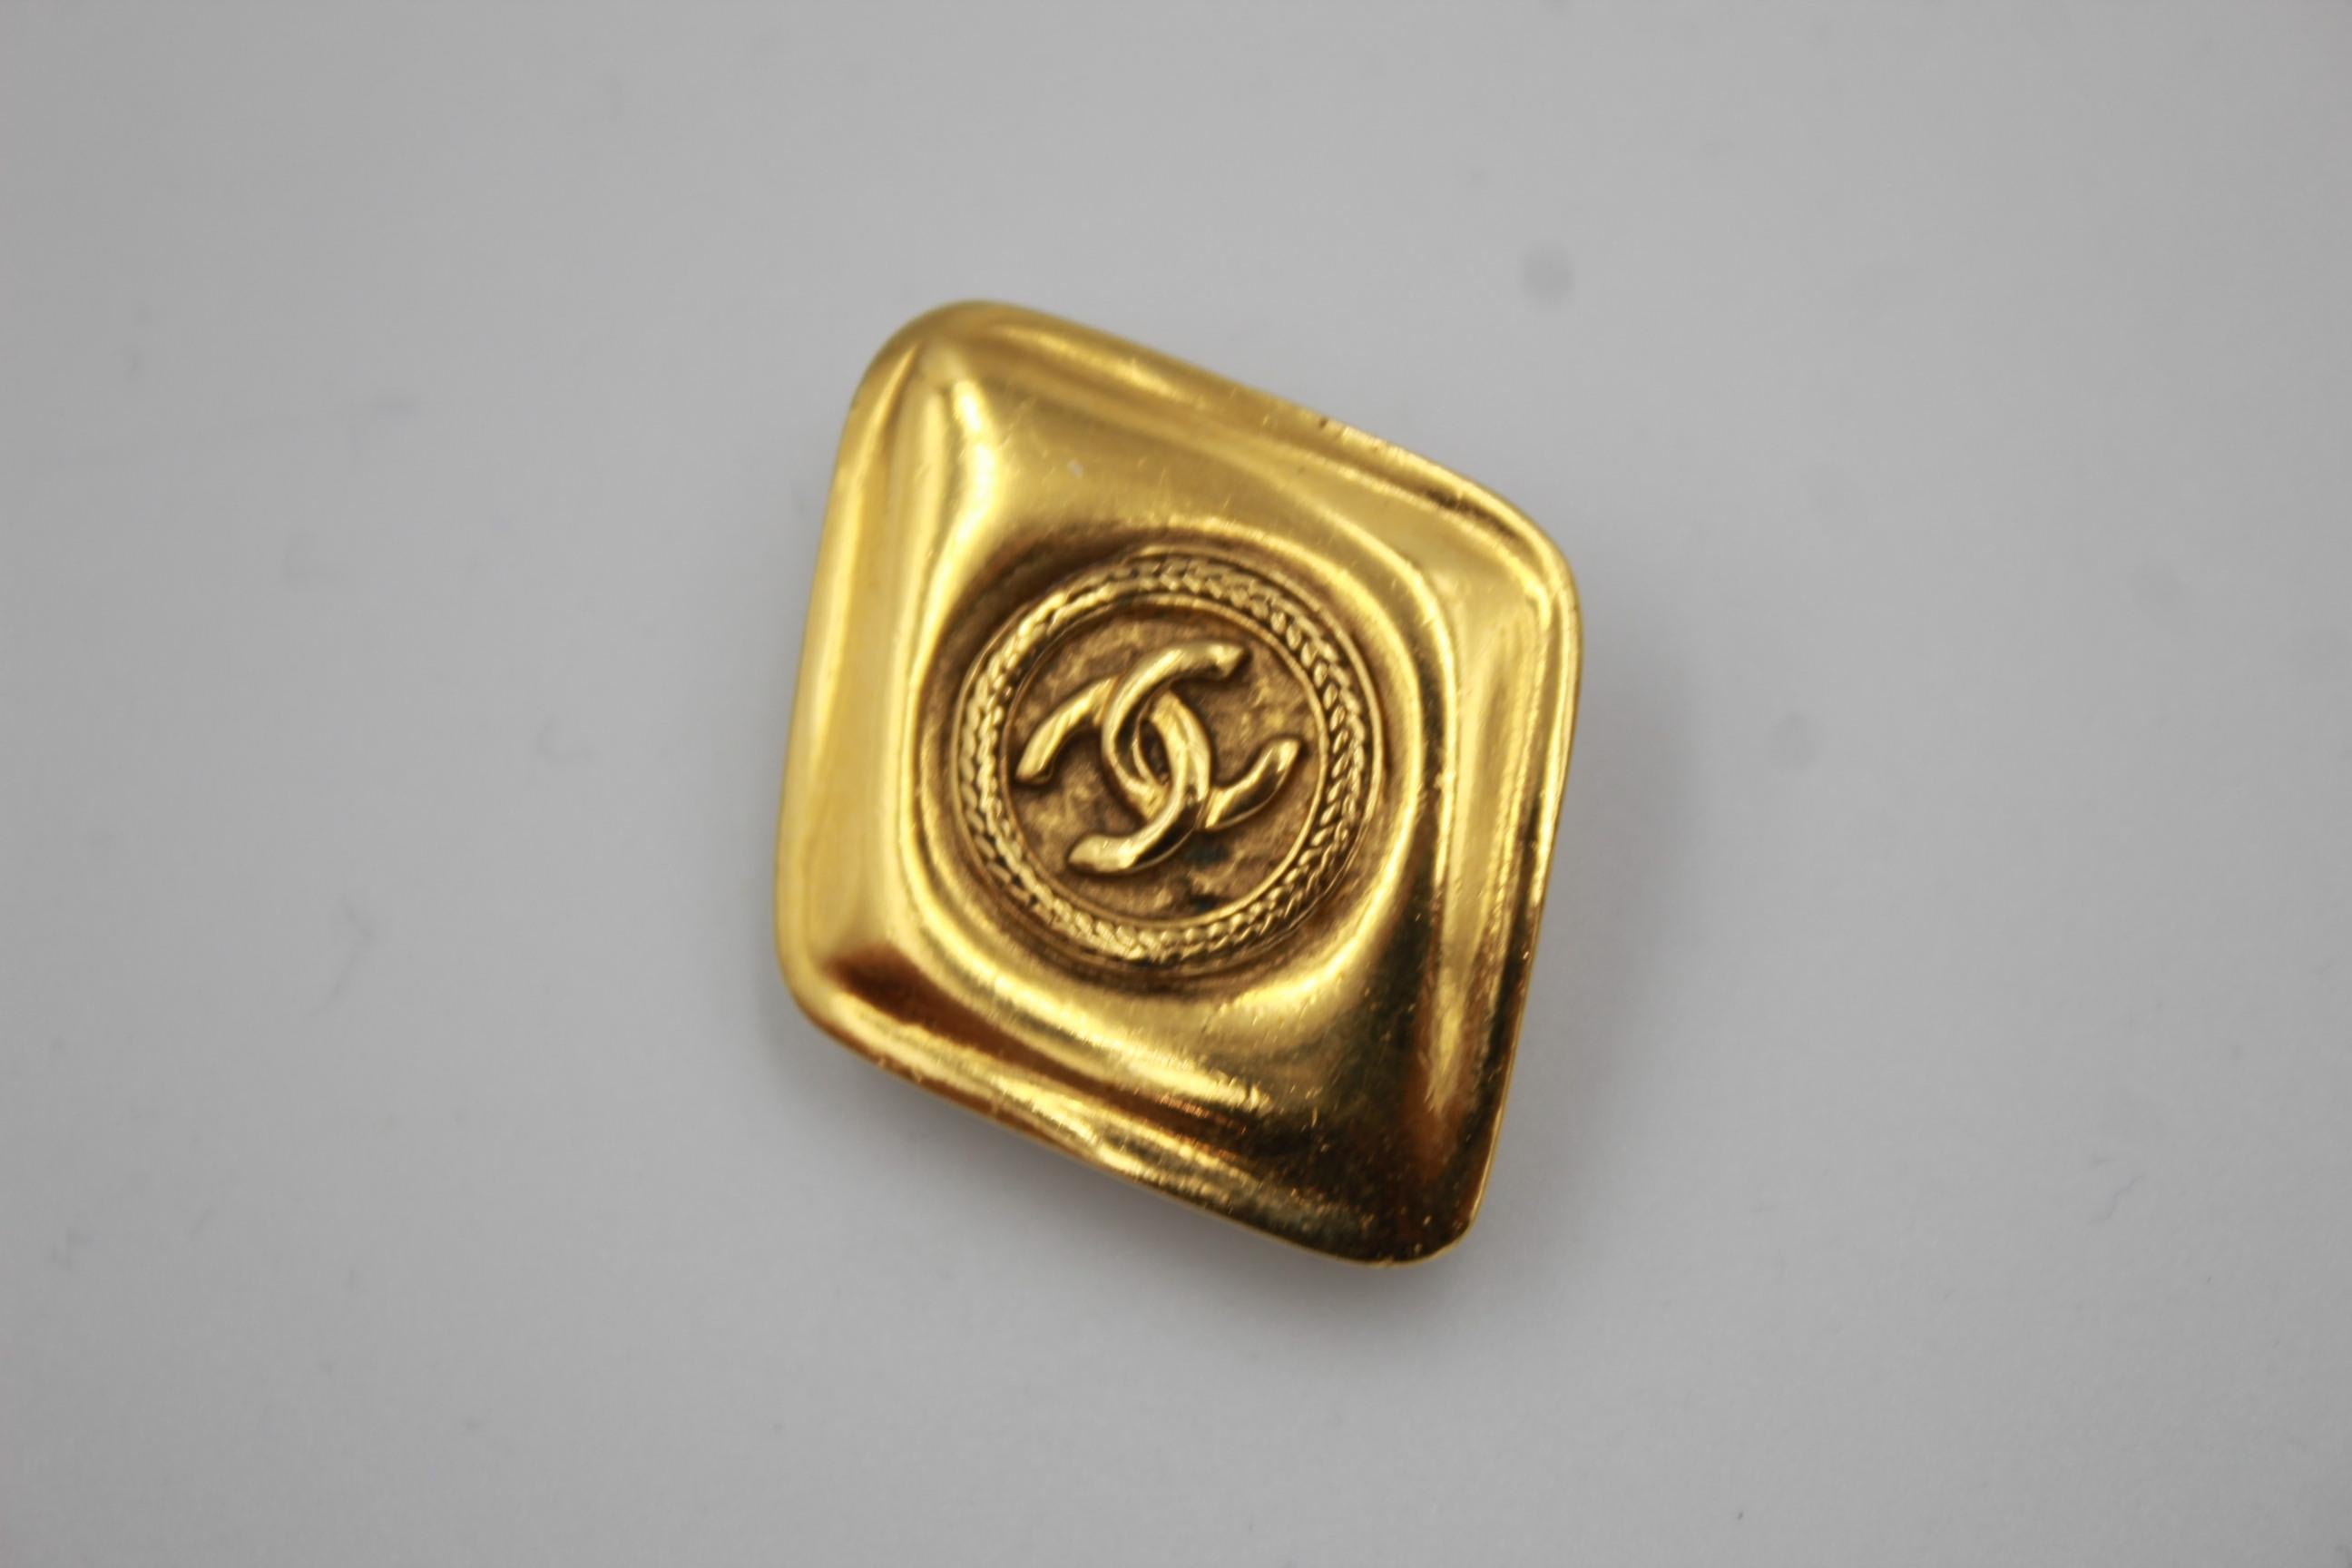 Vintage Chanel earrings in gold plated metal. 
Good vintage condition.
Clip system